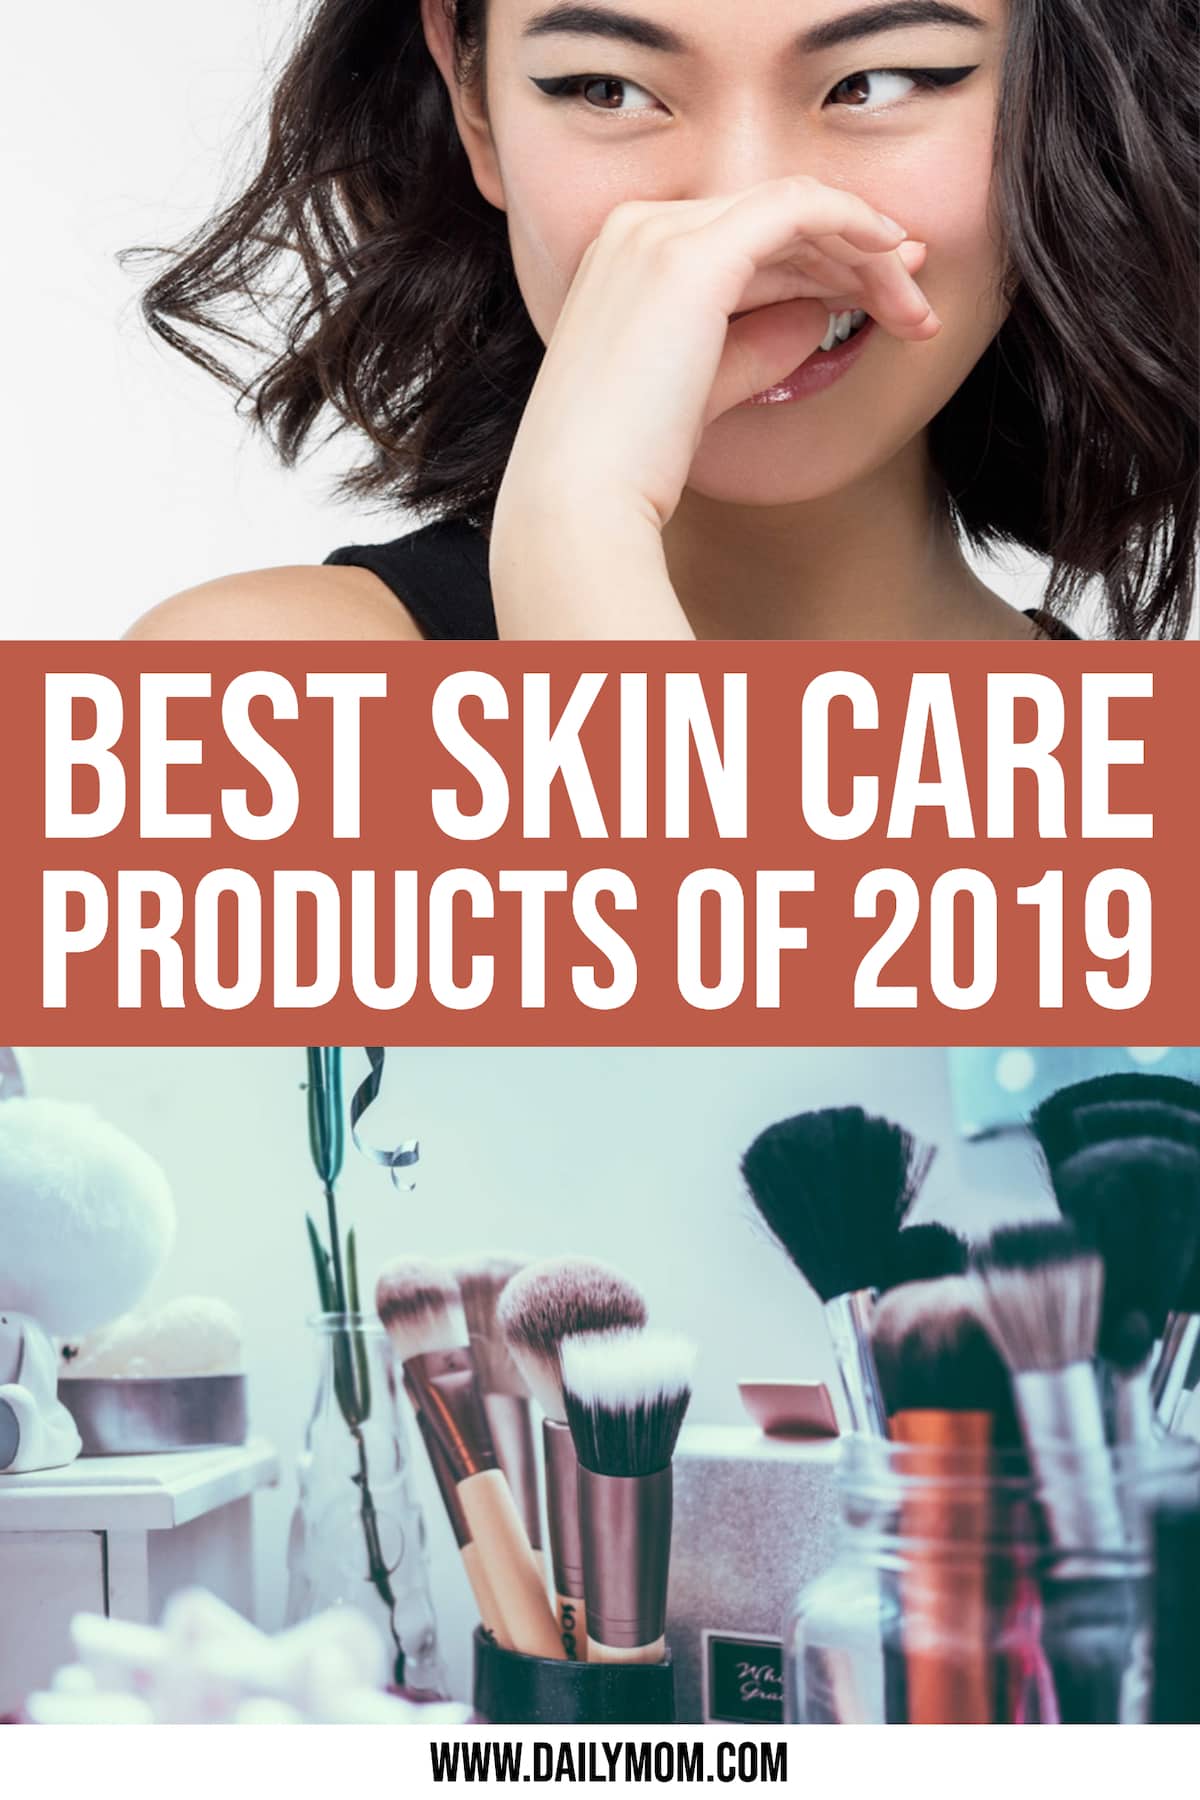 The Best Skin Care Products Of 2019 » Read Now!